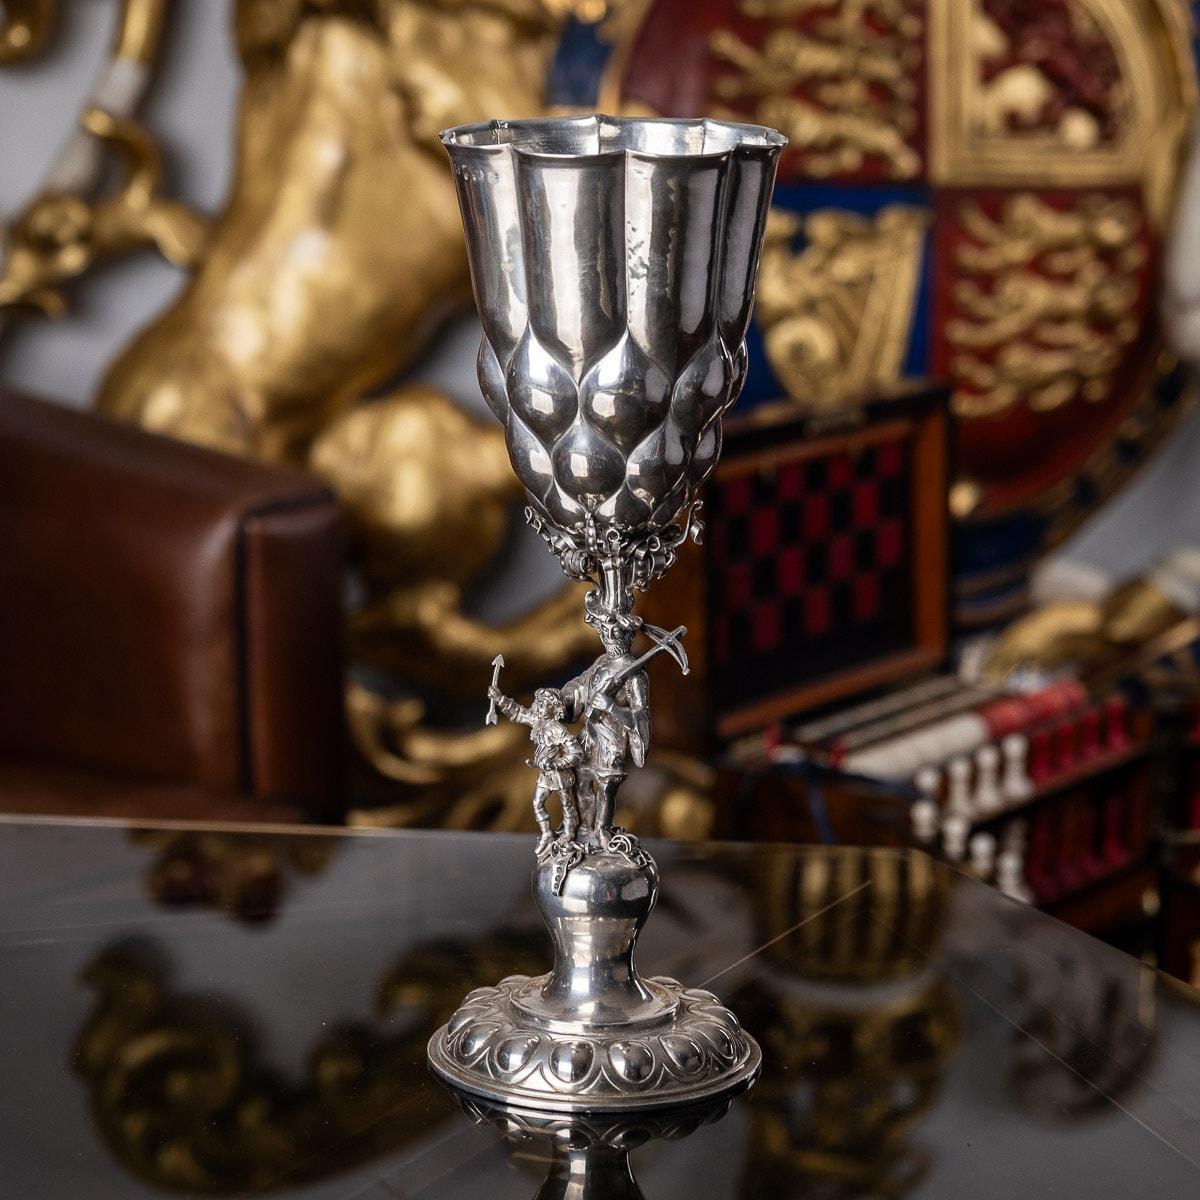 Antique 19th Century German solid silver cup, made in the style of the early-17th Century examples originally made in Augsburg and Nuremberg. Standing on adorned circular foot chased with lobes, the stem shaped as an archer and his young assistant,